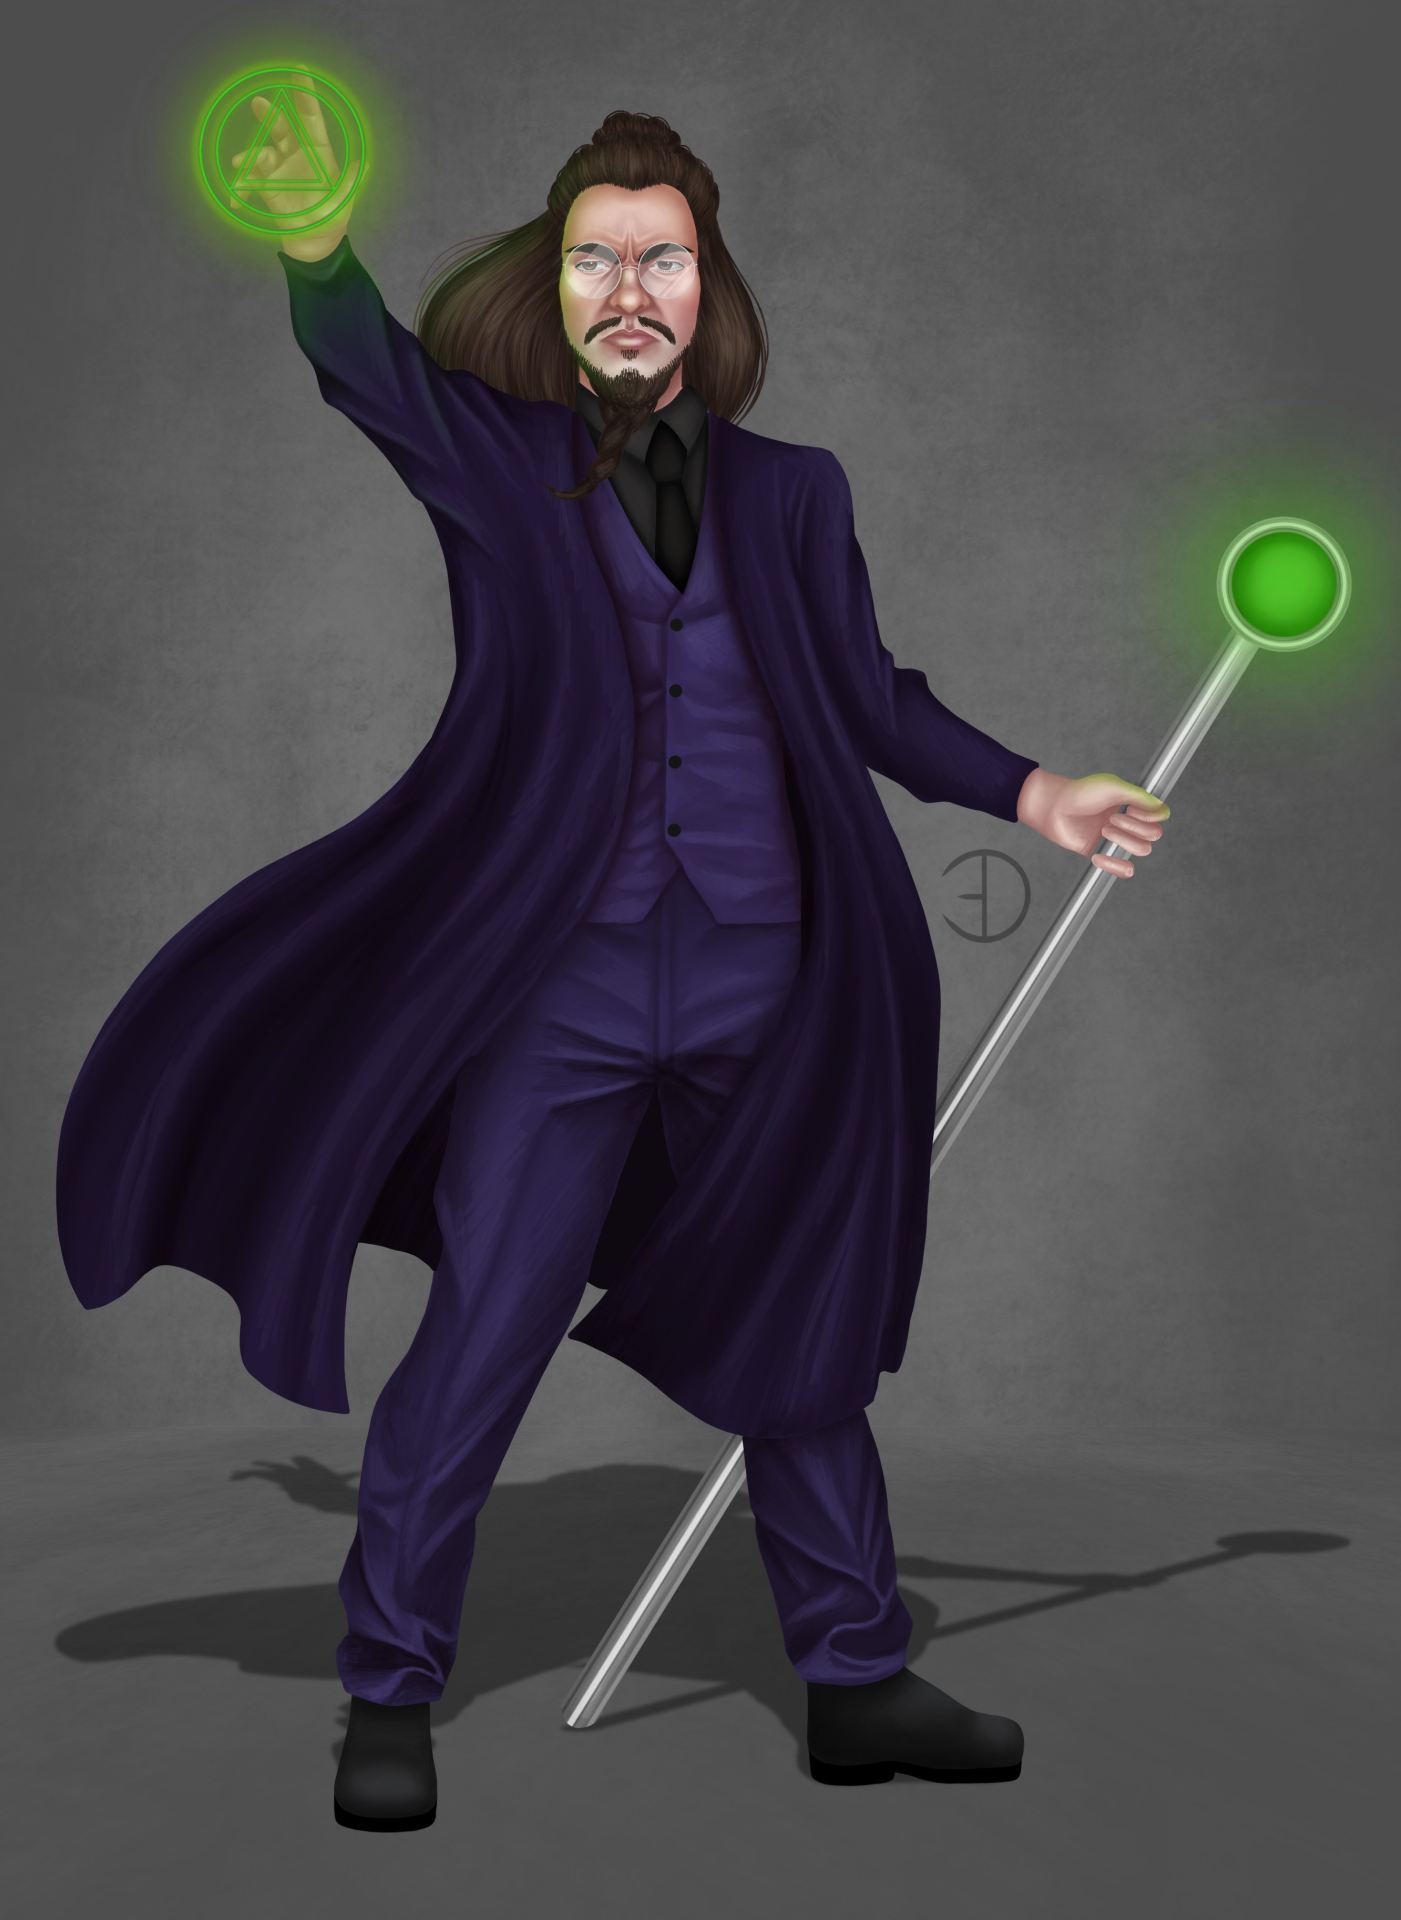 A full-body illustration of a wizard in a full purple suit and coat, with long hair and a beard holding a glowing staff. His left hand is reaching up in the air to cast a spell.